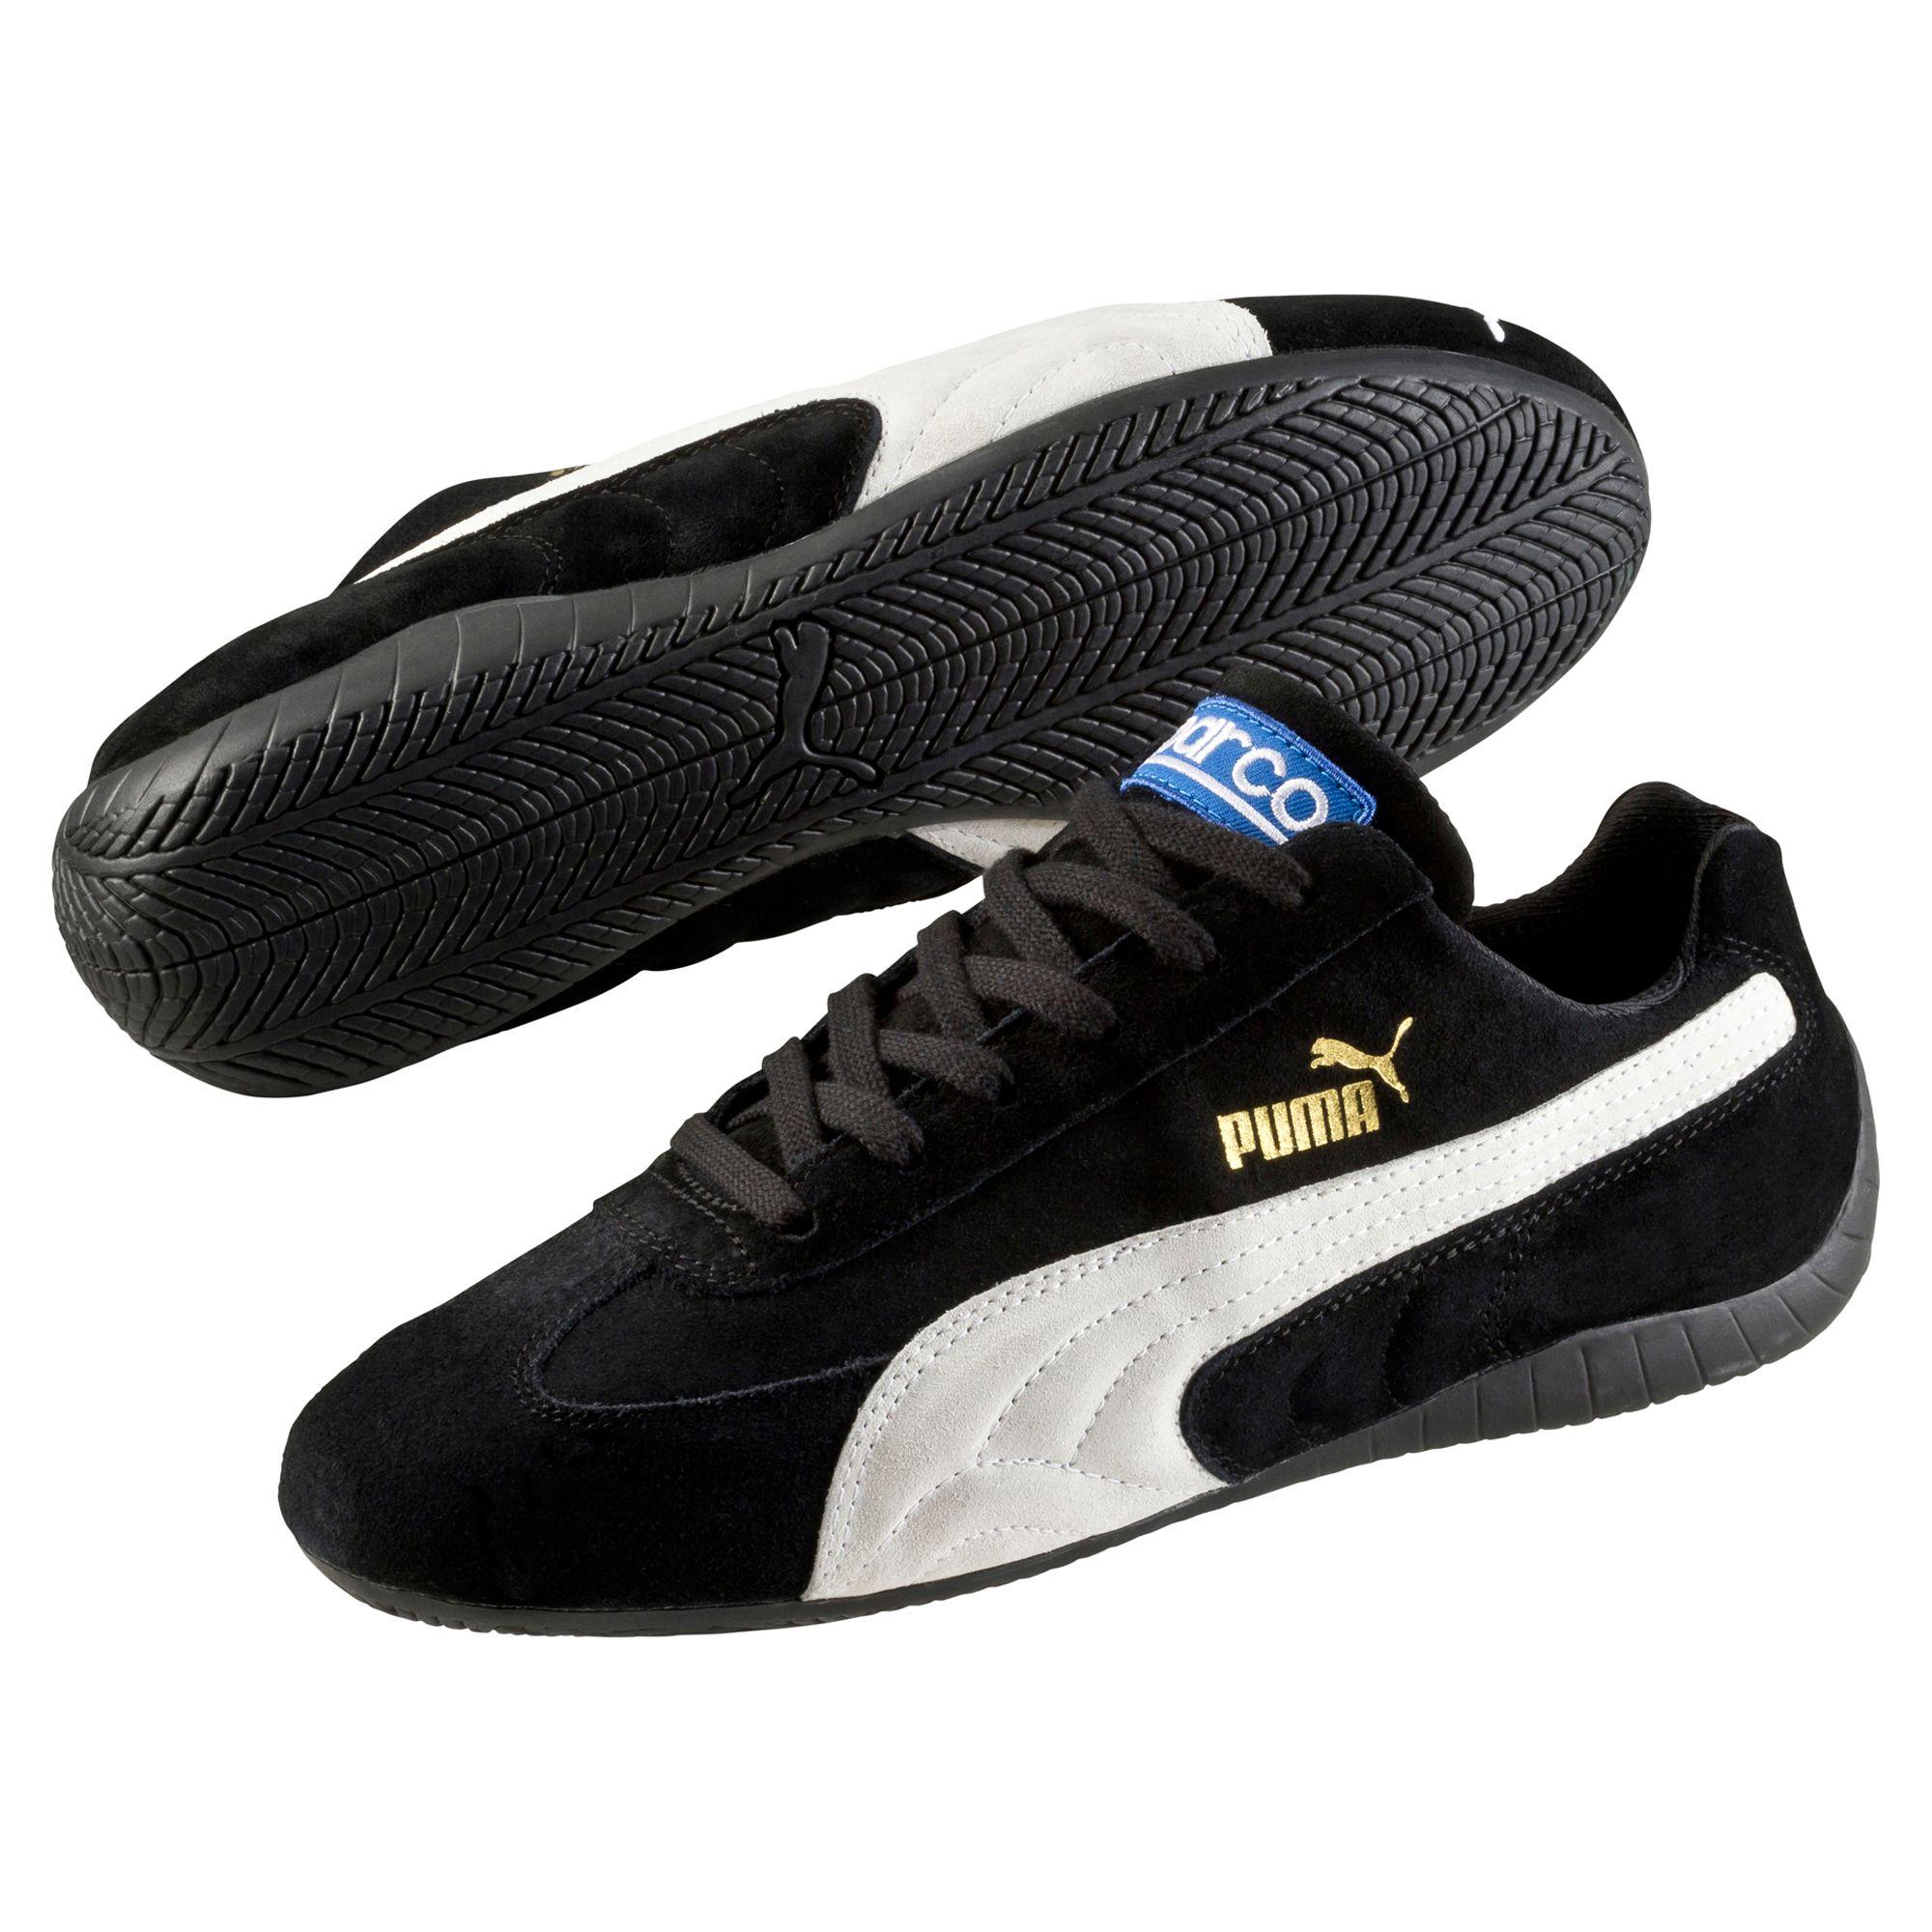 Lyst - PUMA Speed Cat Sparco Shoes in Black for Men